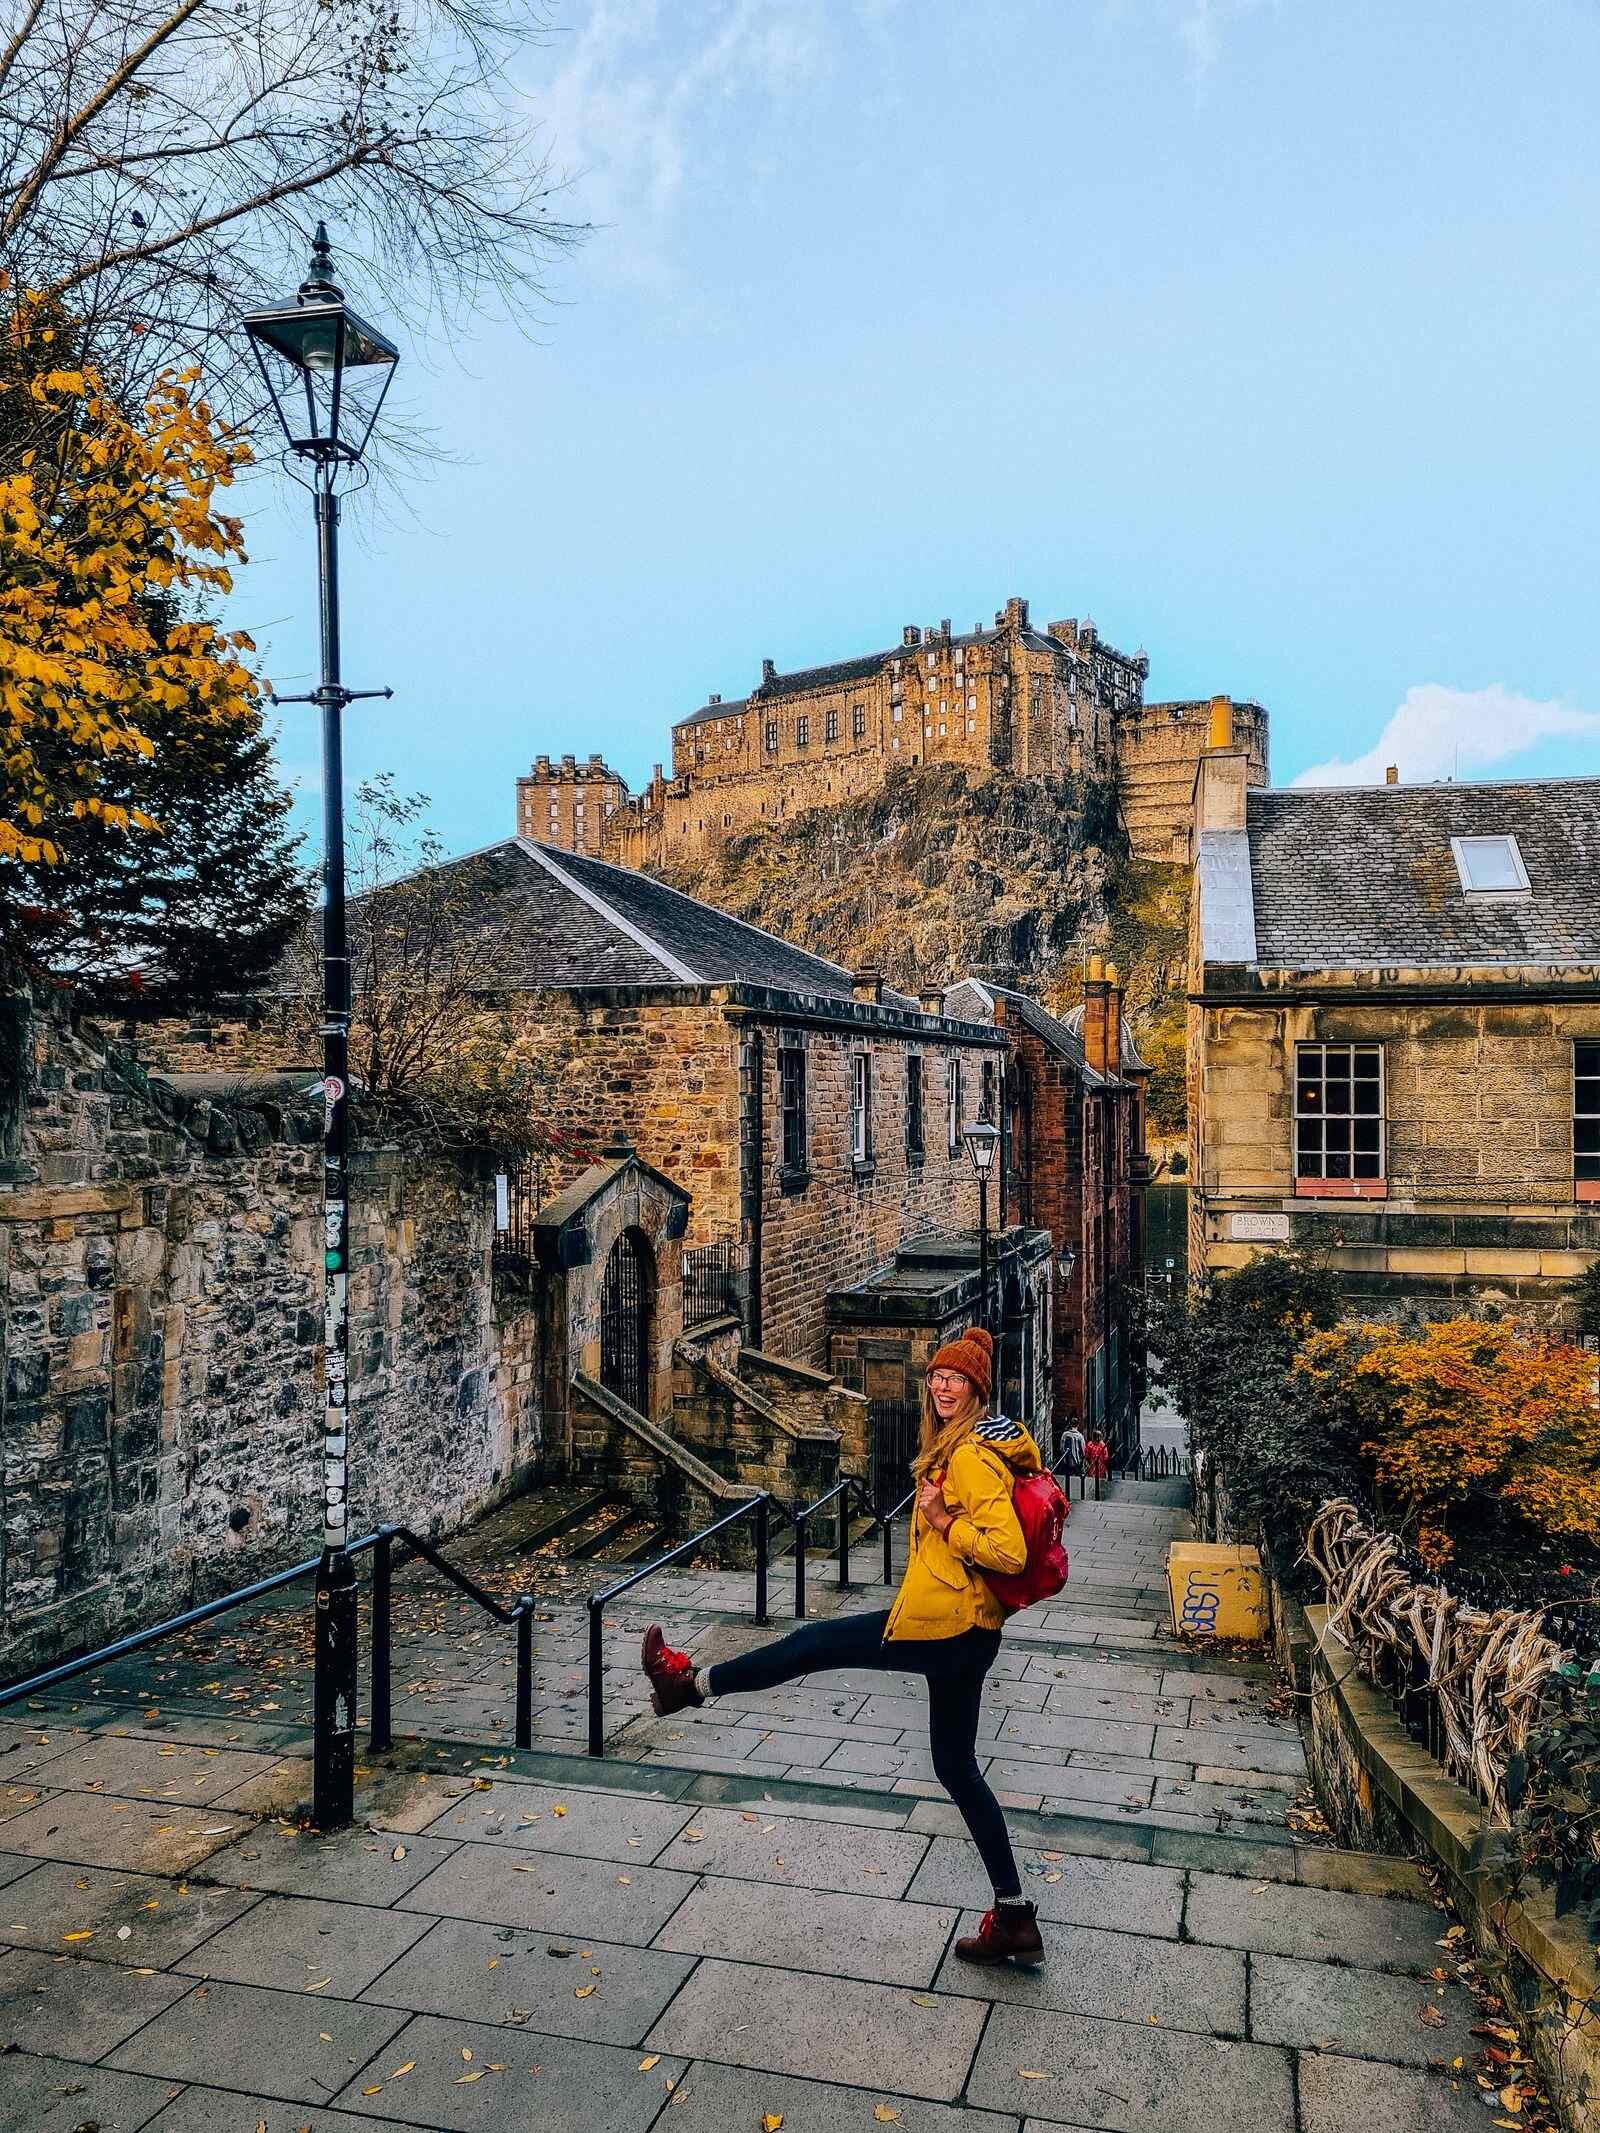 A girl on the stone steps at the Vessel viewpoint of Edinburgh Castle, she wears a yello coat and a wooly hat and is kicking her leg out in the air